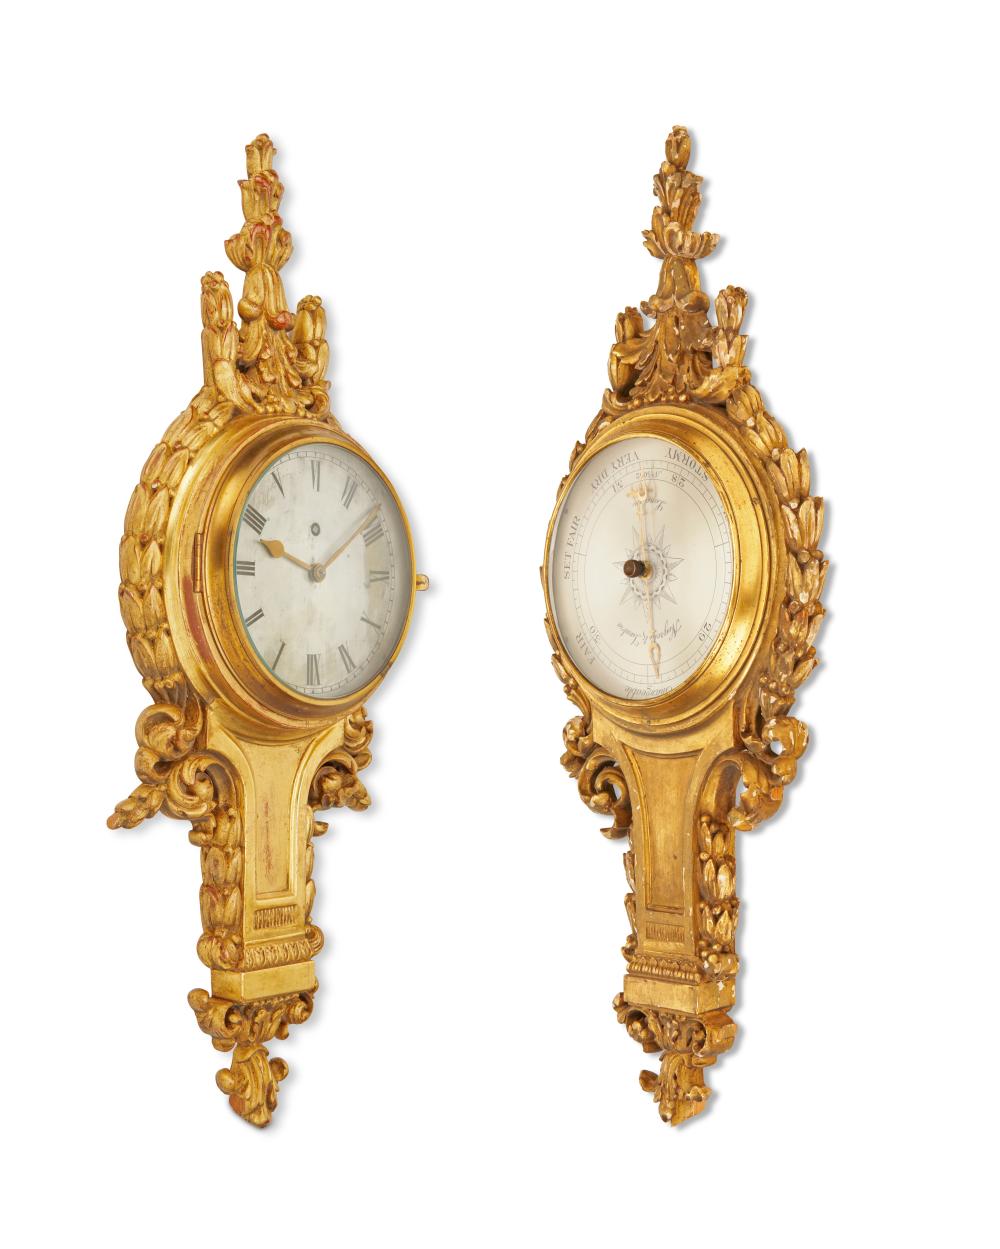 A NEAR PAIR FRENCH WALL CLOCK AND 2ee8f9